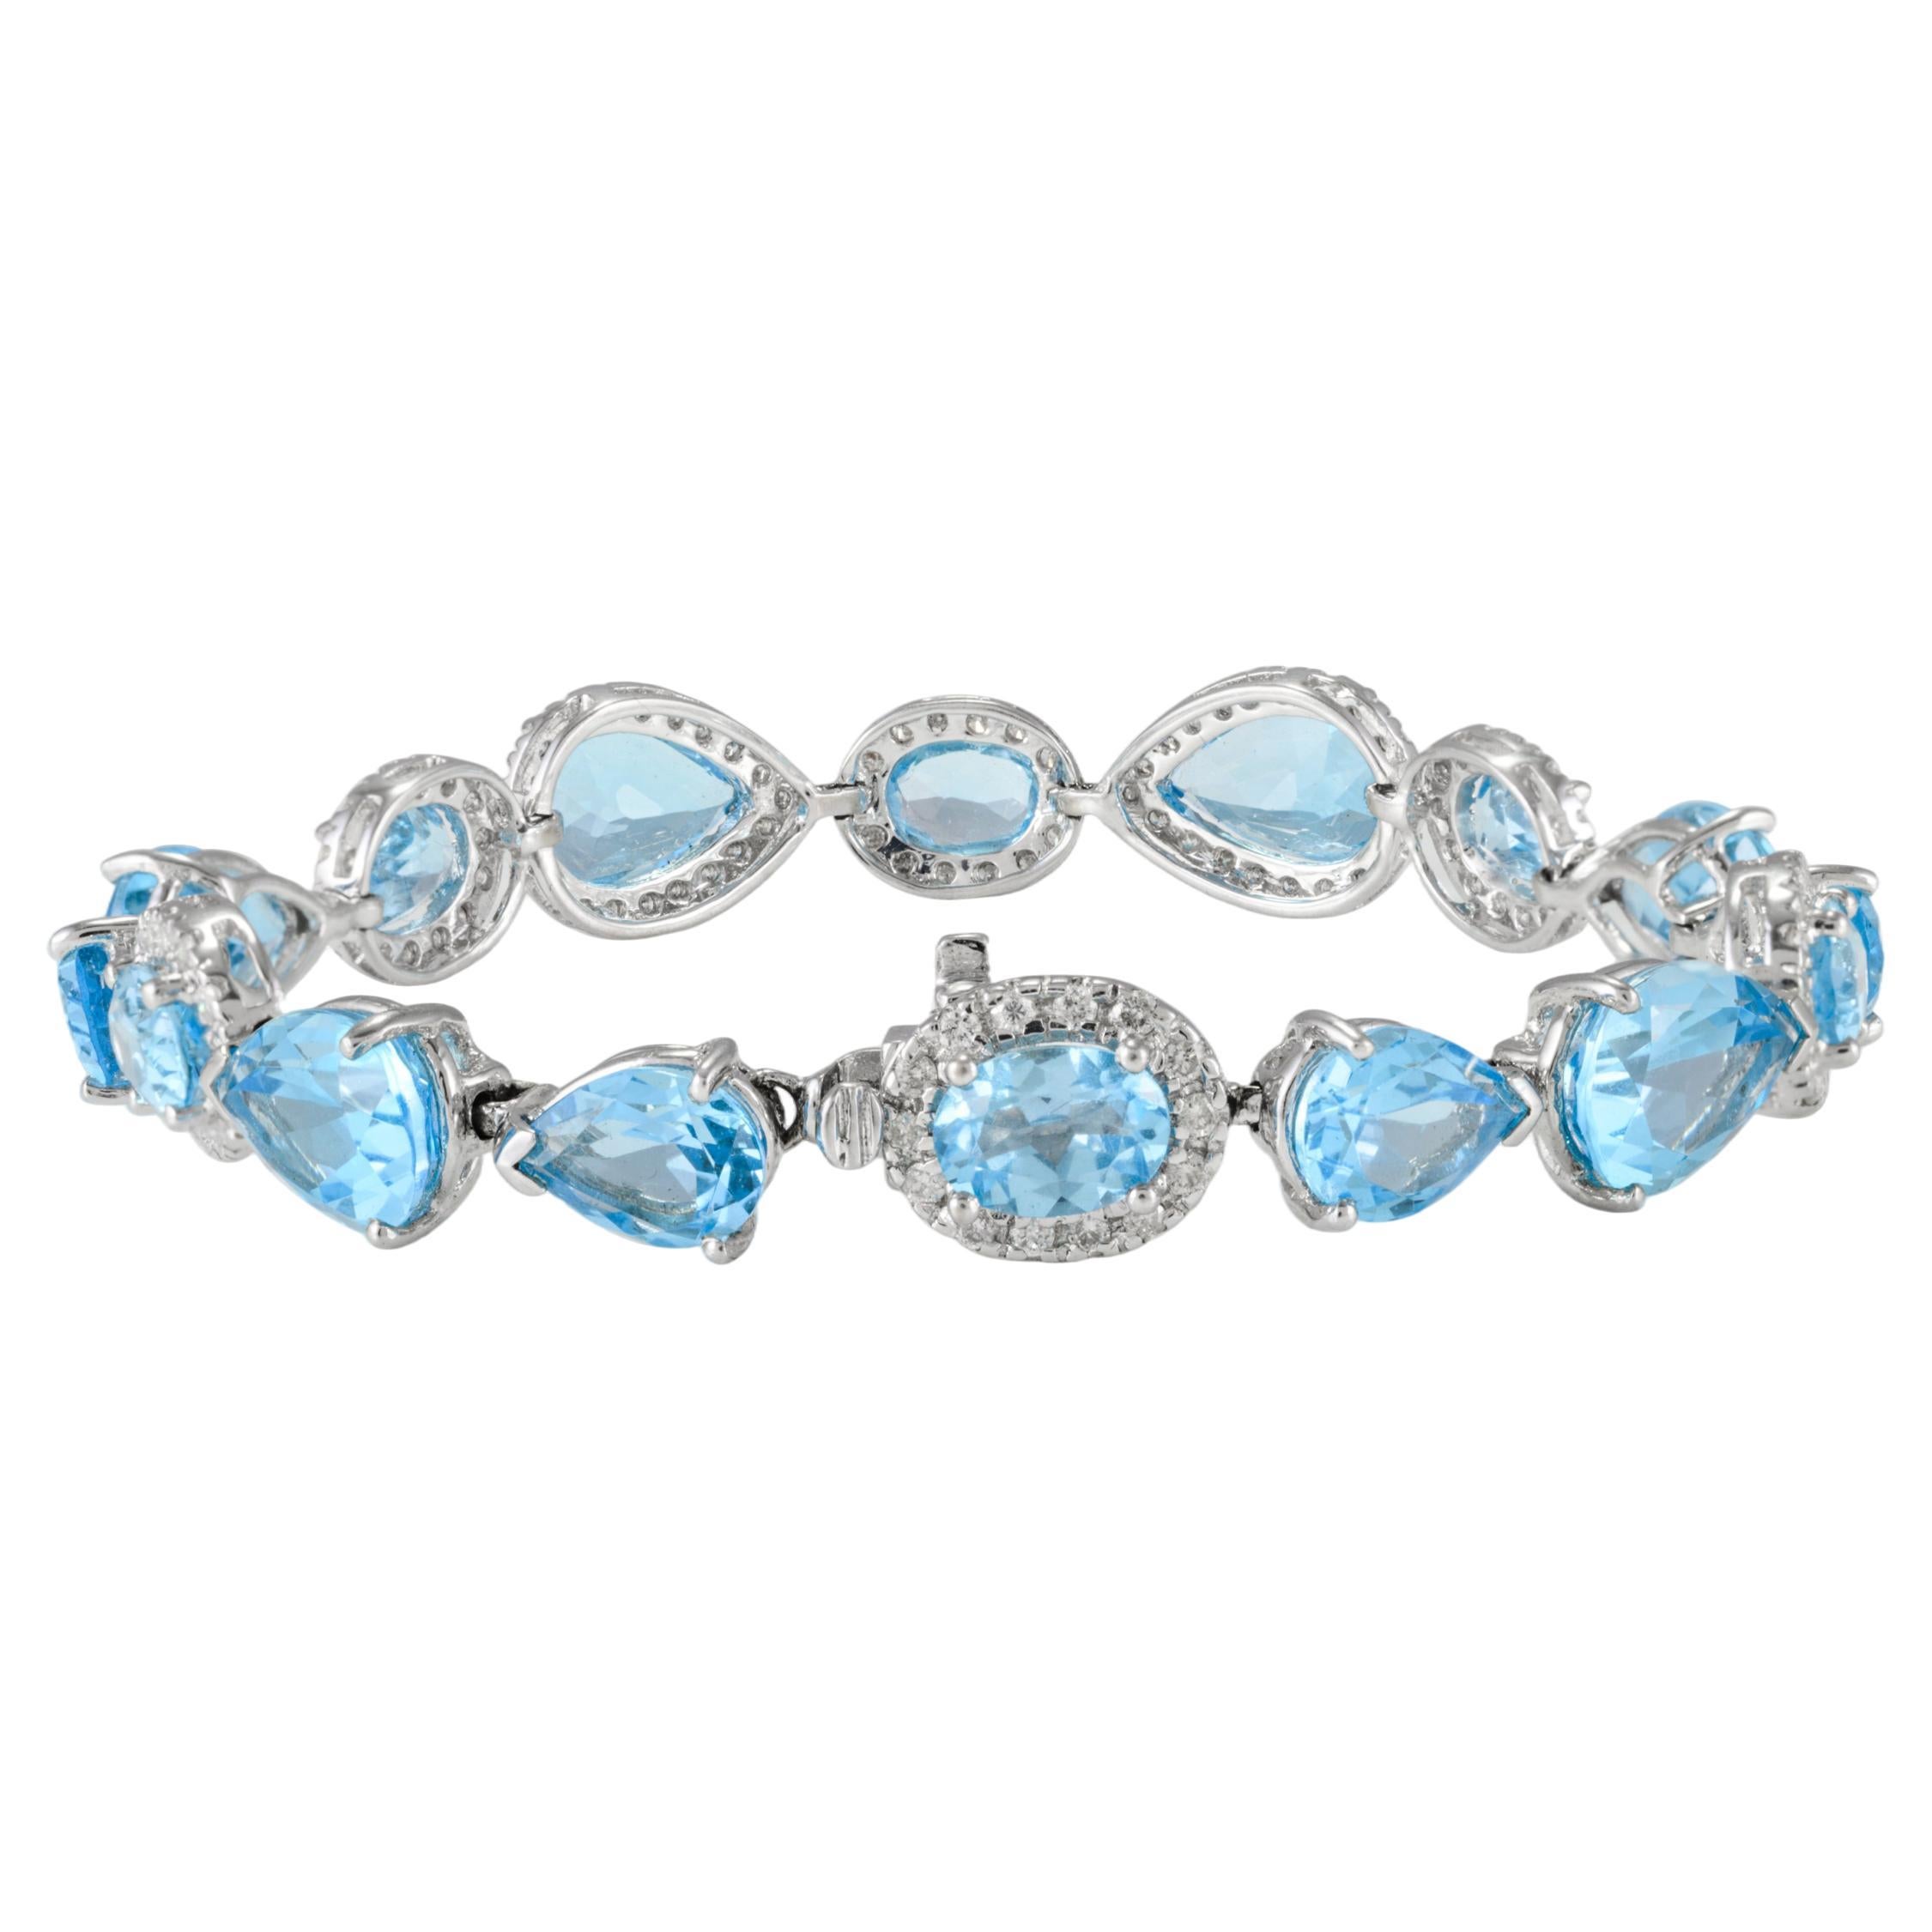 25.92ct Mixed Cut Blue Topaz and Halo Diamond Tennis Bracelet 18k White Gold For Sale